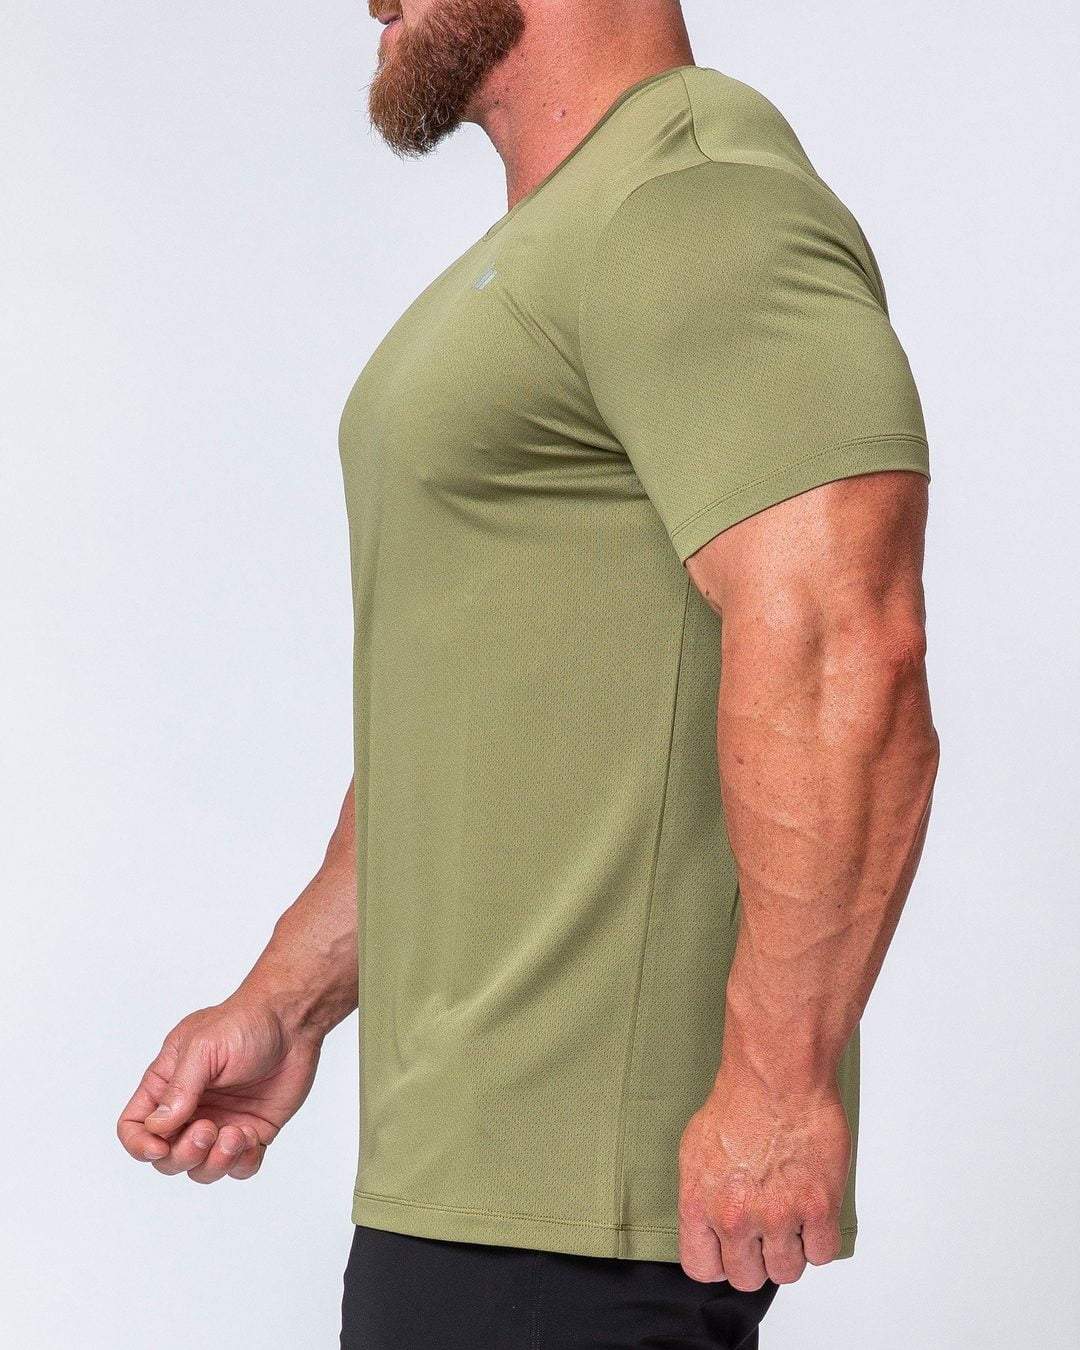 musclenation Mens Running Tee - Olive